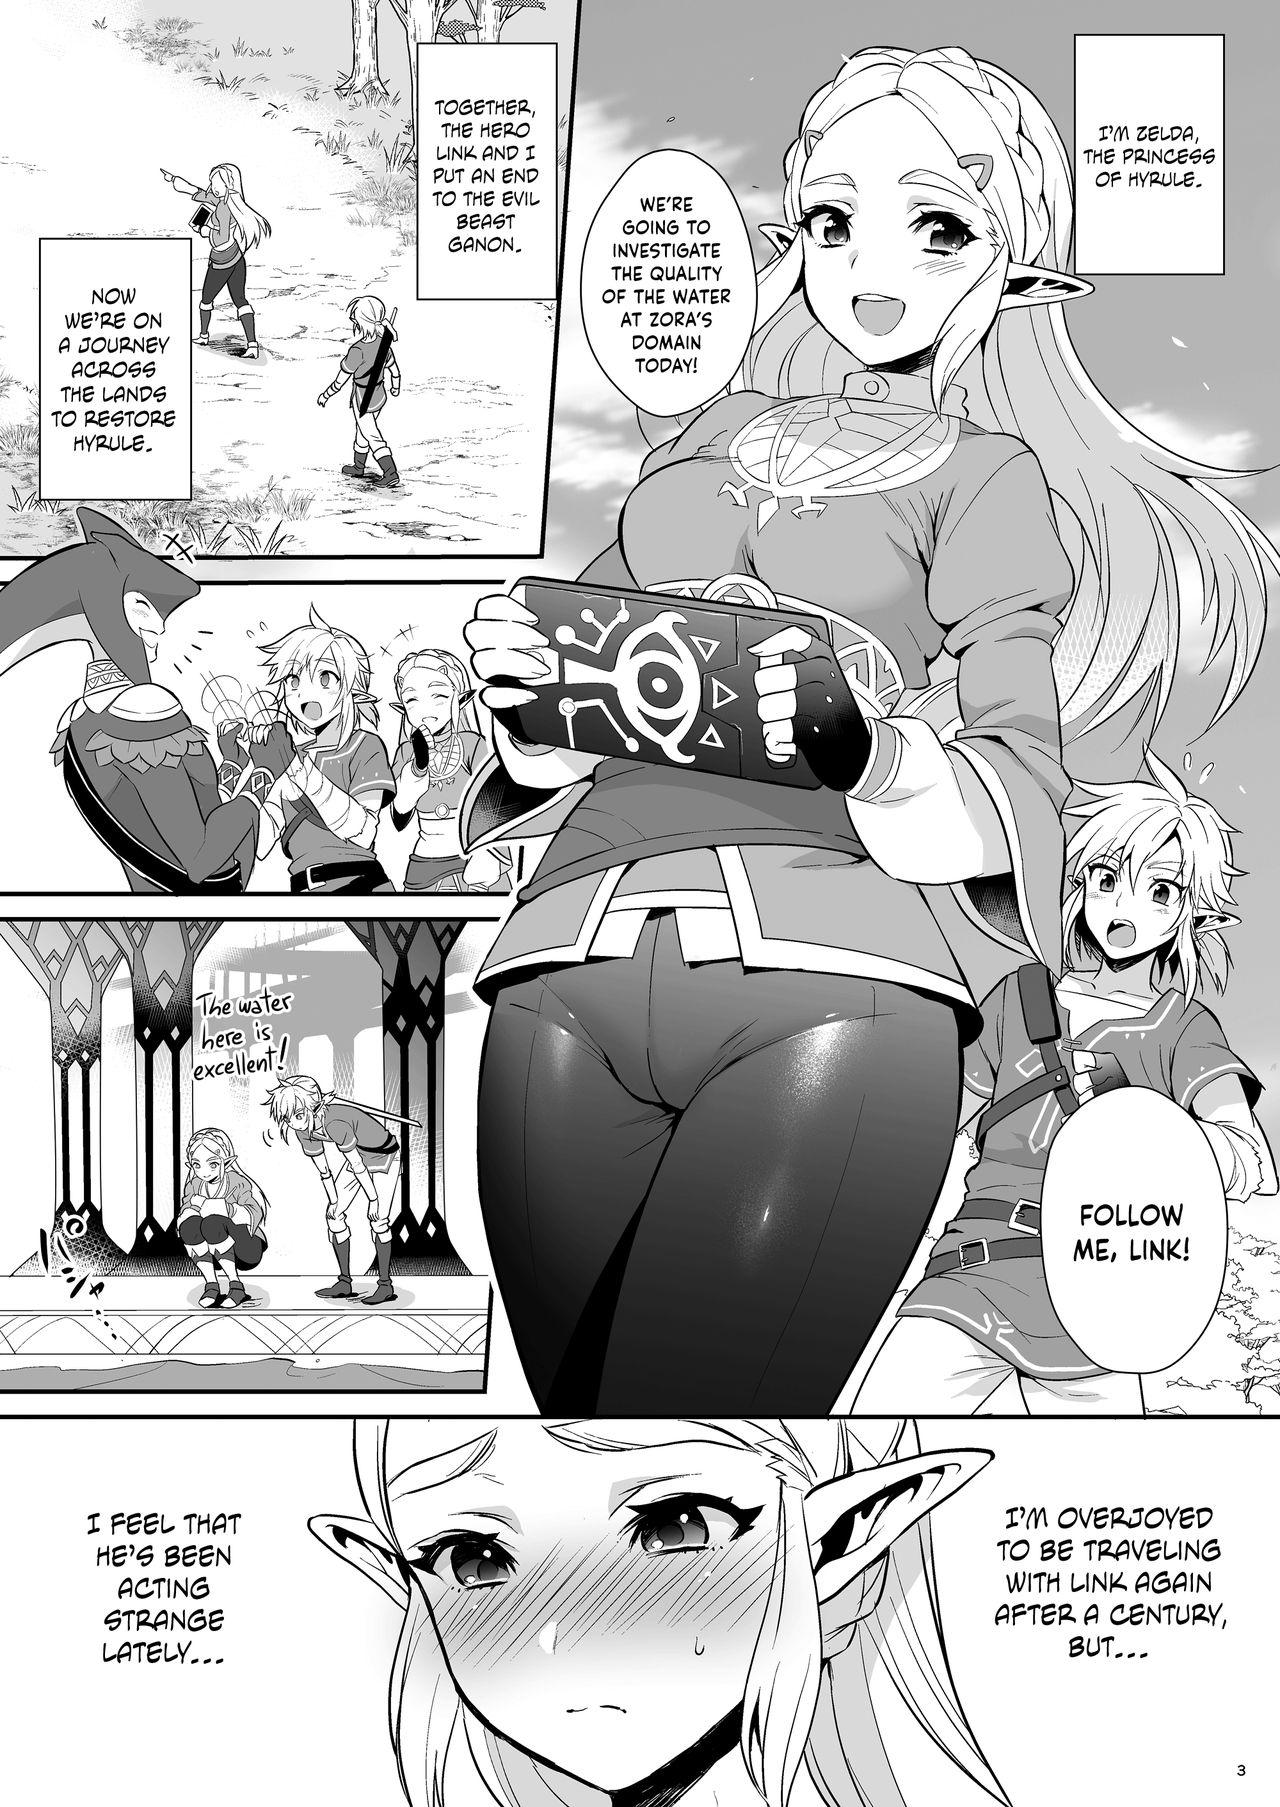 Pussysex Hyrule Hanei no Tame no Katsudou! | Taking Steps to Ensure Hyrule's Prosperity! - The legend of zelda Argentino - Page 4